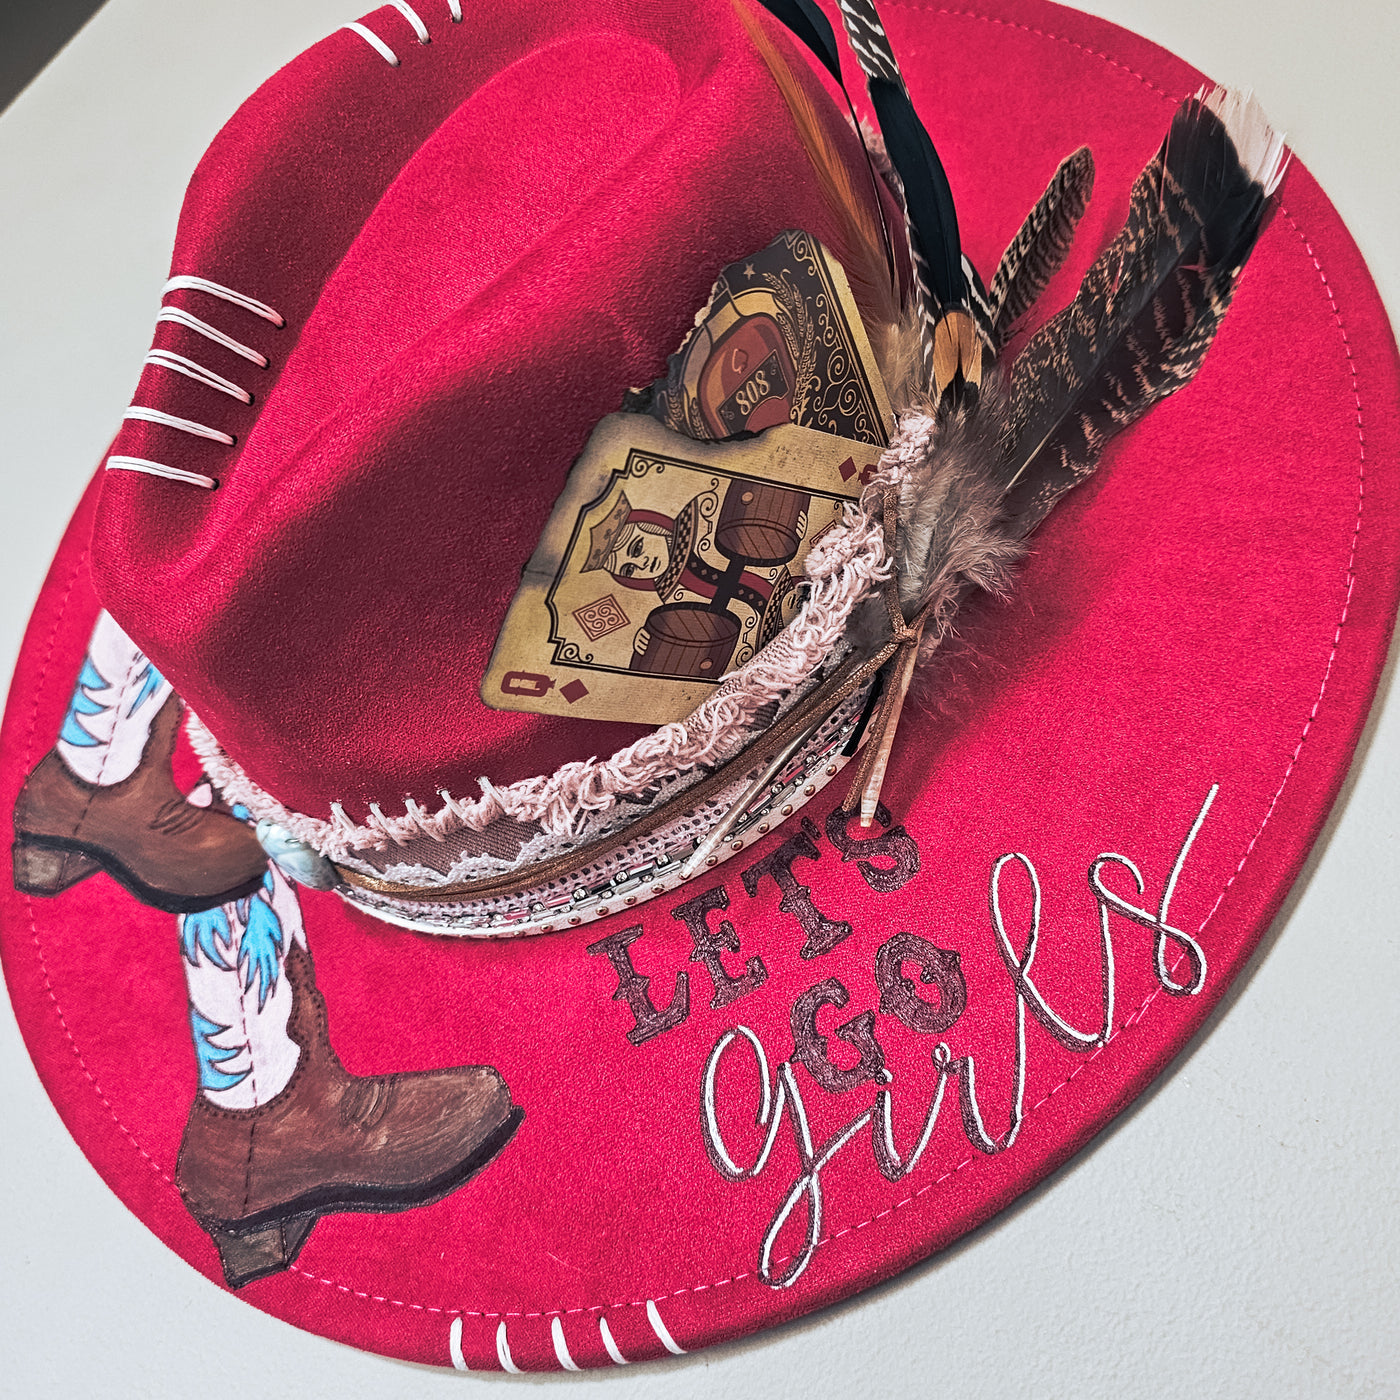 Let's Go Girls + Genuine Larimar Stone || Cranberry Fuschia Suede Burned and Painted Wide Brim Hat